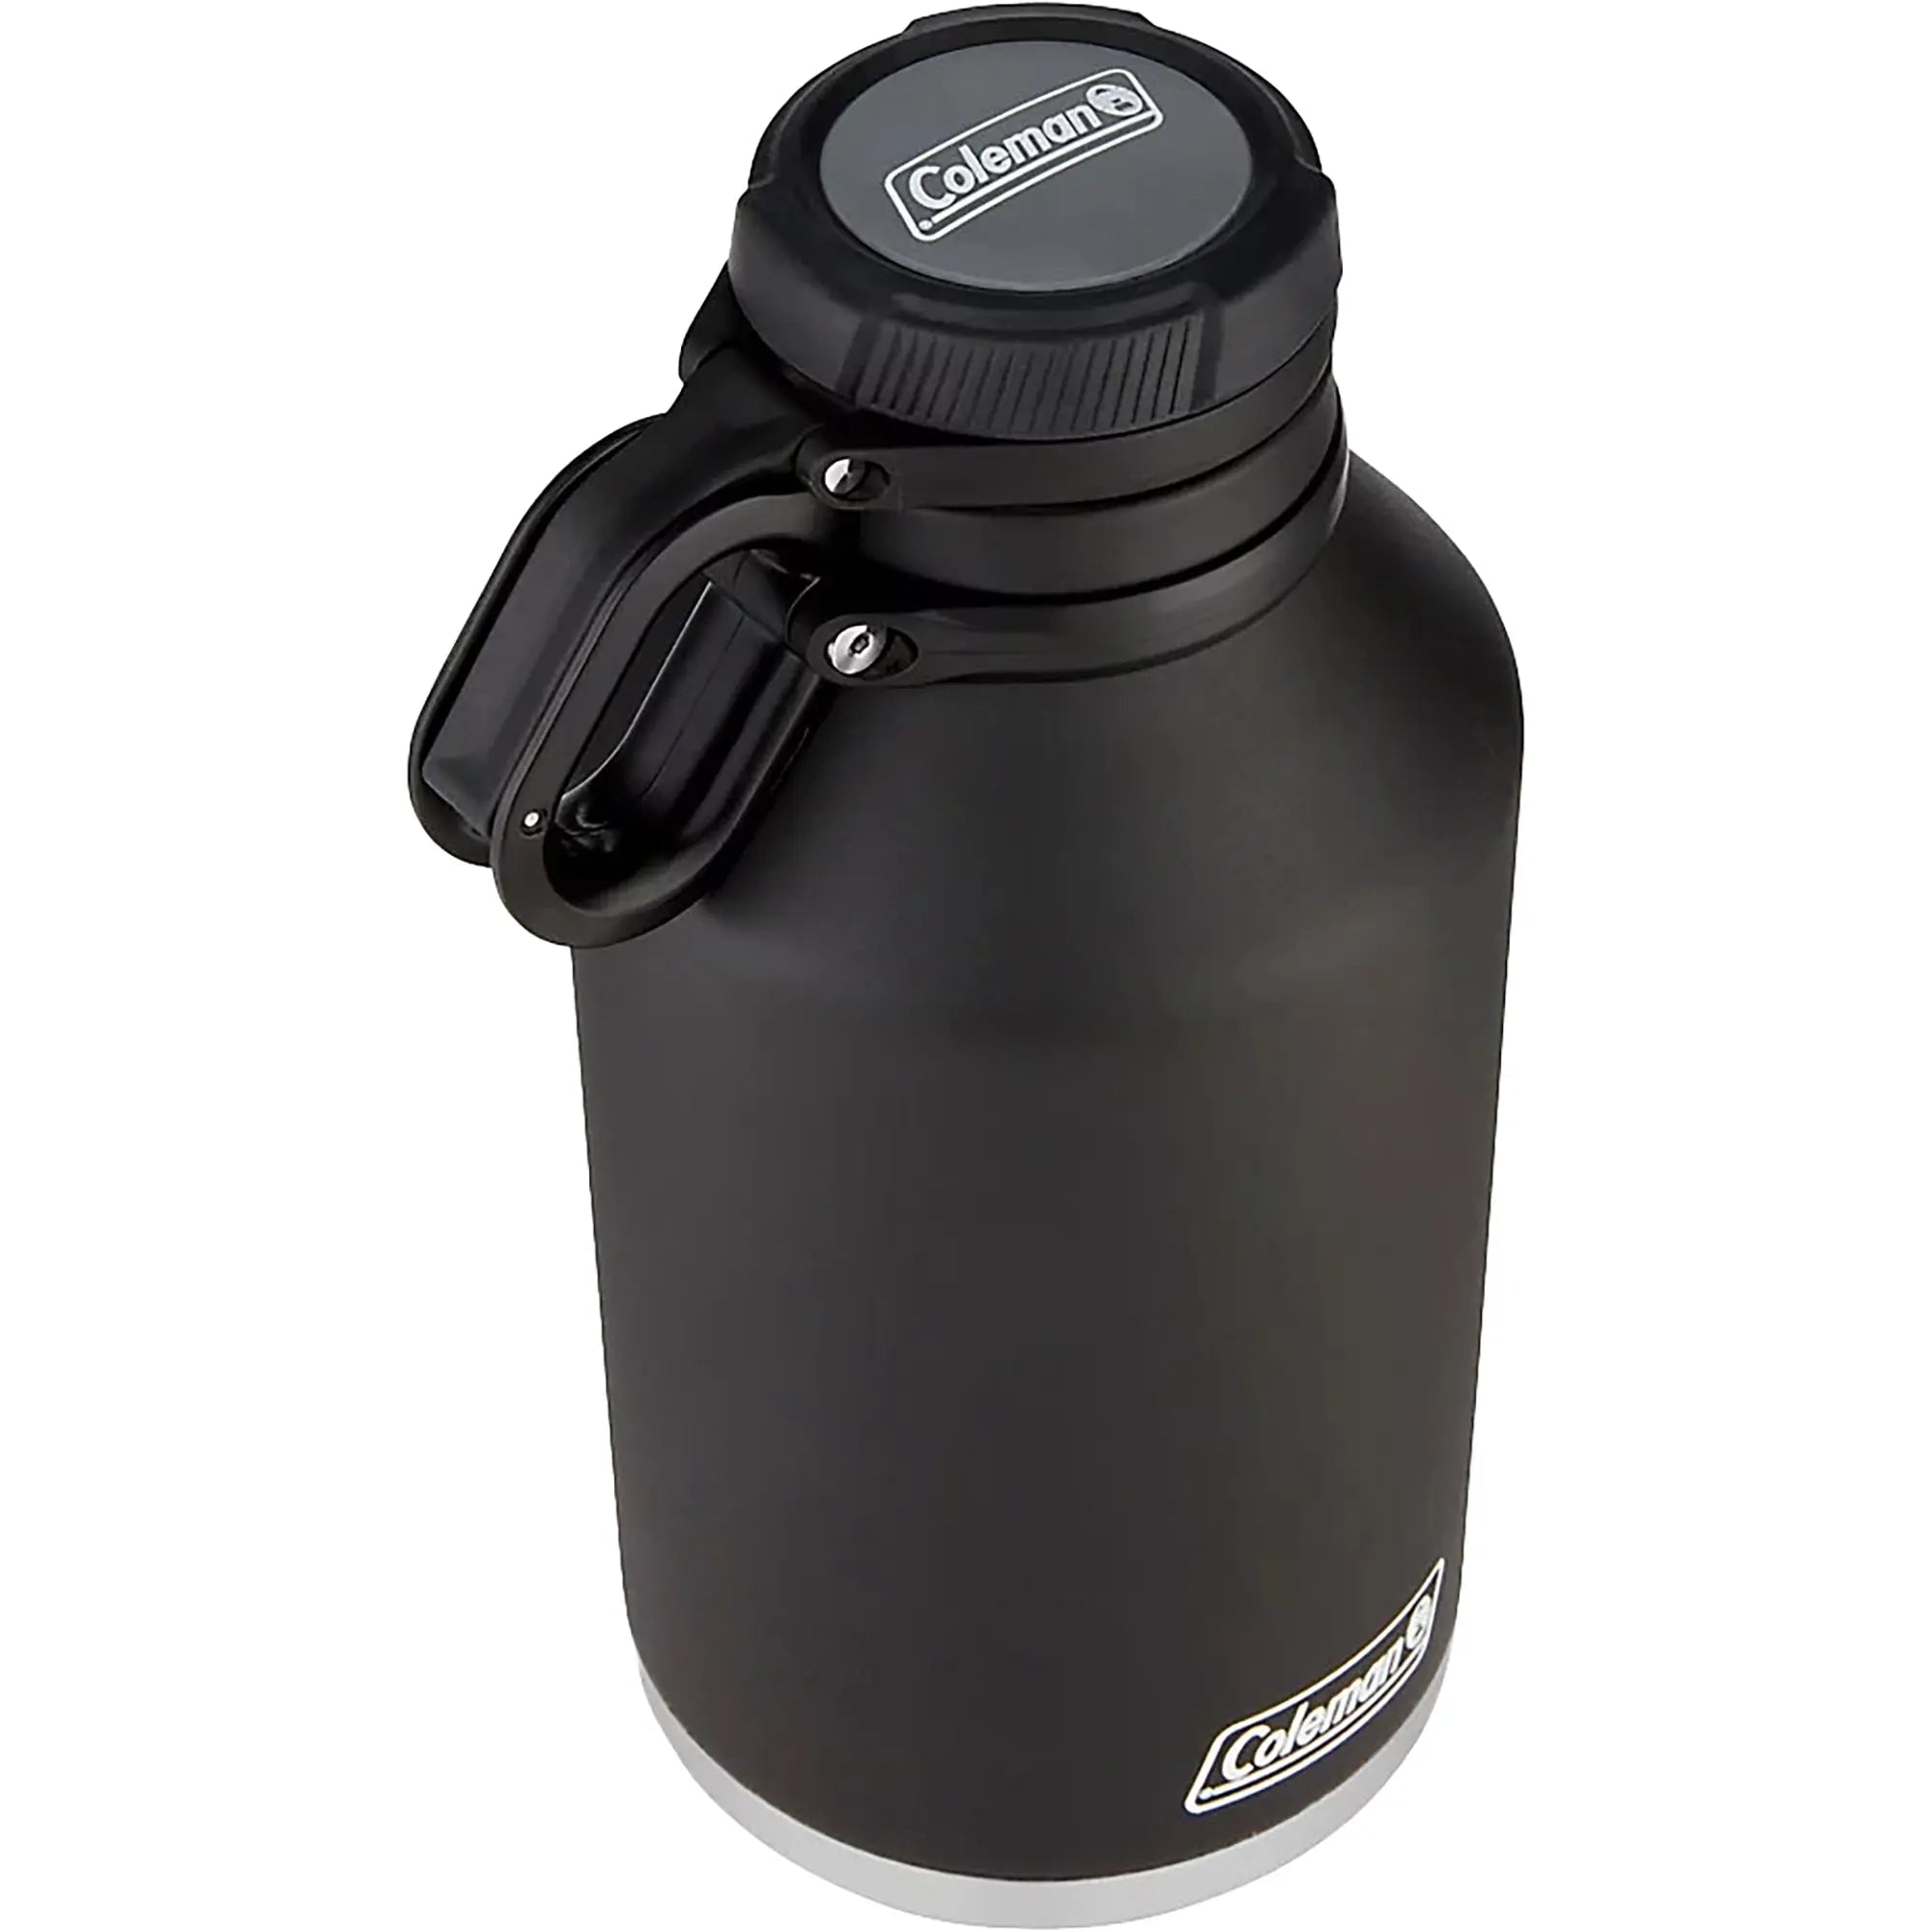 Coleman 64 oz. Vacuum Insulated Stainless Steel Growler - Black Coleman